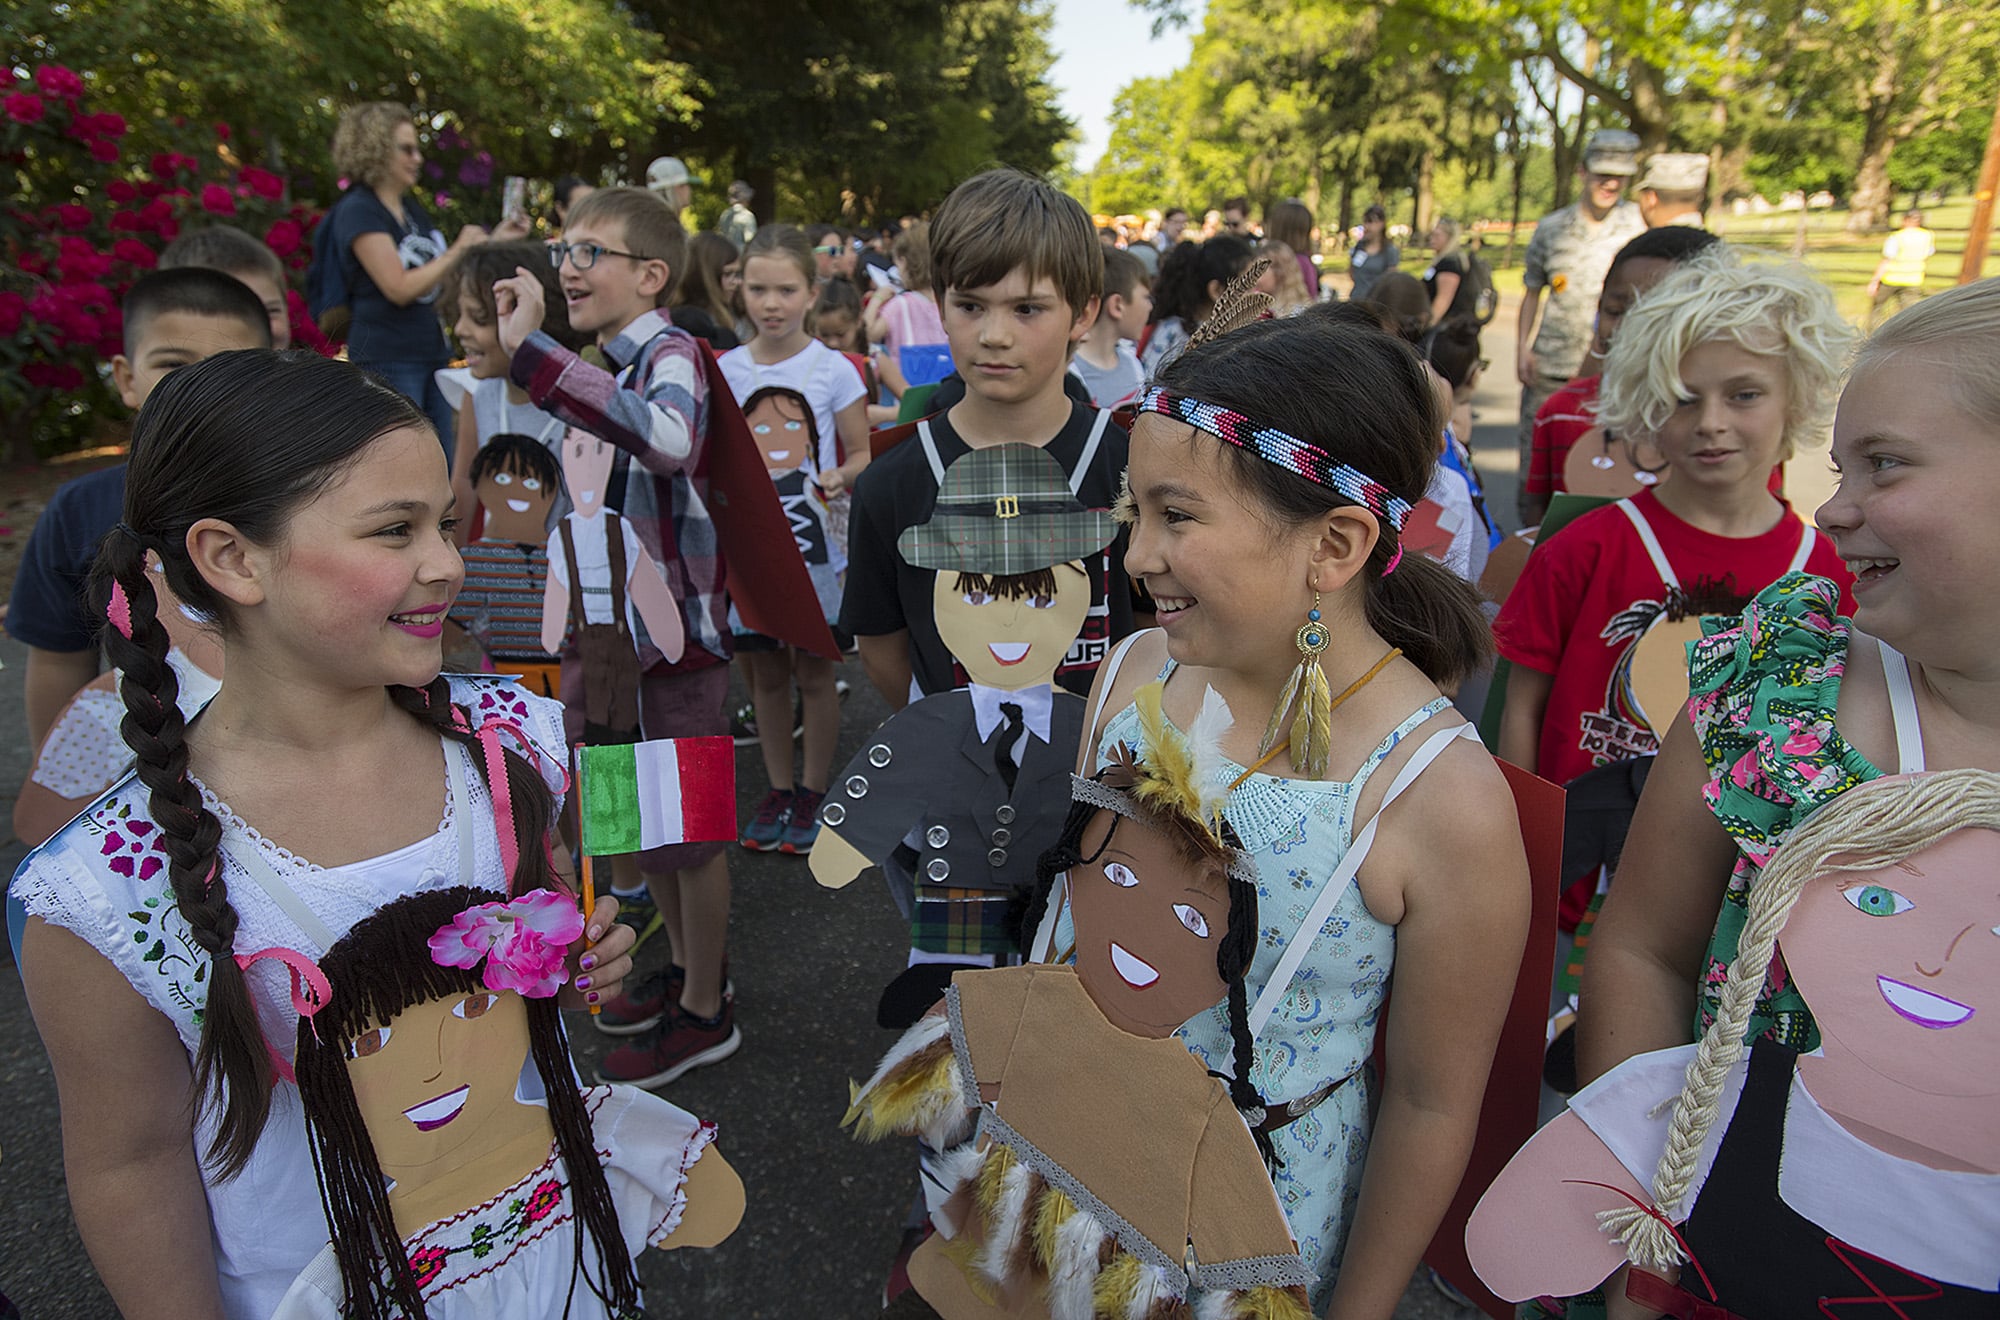 Lake Shore Elementary School third-graders Heaven Rodriguez, with braids, who was representing Mexico, joins classmate Isabella Lester, both 9, who was representing Native Americans, as they wait for the annual Children's Cultural Parade to begin at Fort Vancouver National Historic Site on Friday morning, May 10, 2019. Over 1,500 third grade students celebrated learning, community and diversity as they marched through the parade route and ended at the stockade with a speech by Gov. Jay Inslee.